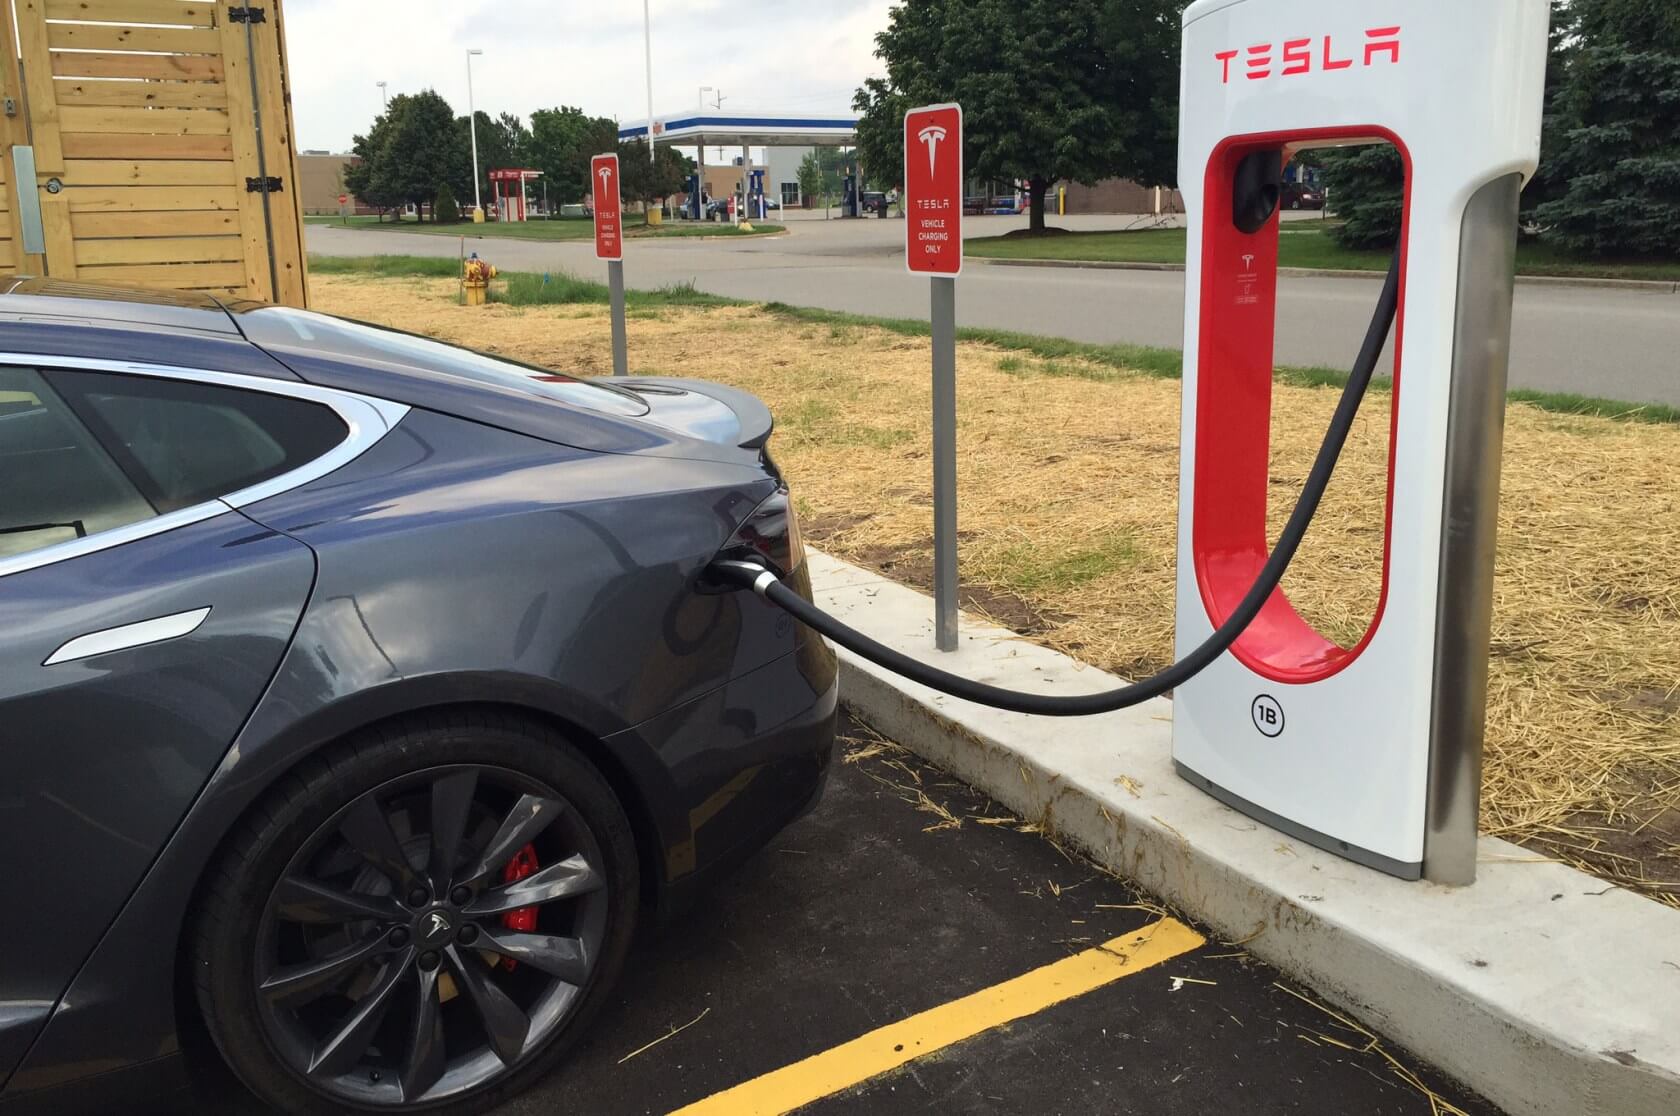 Tesla plans to expand Supercharger coverage across all of Europe in 2019